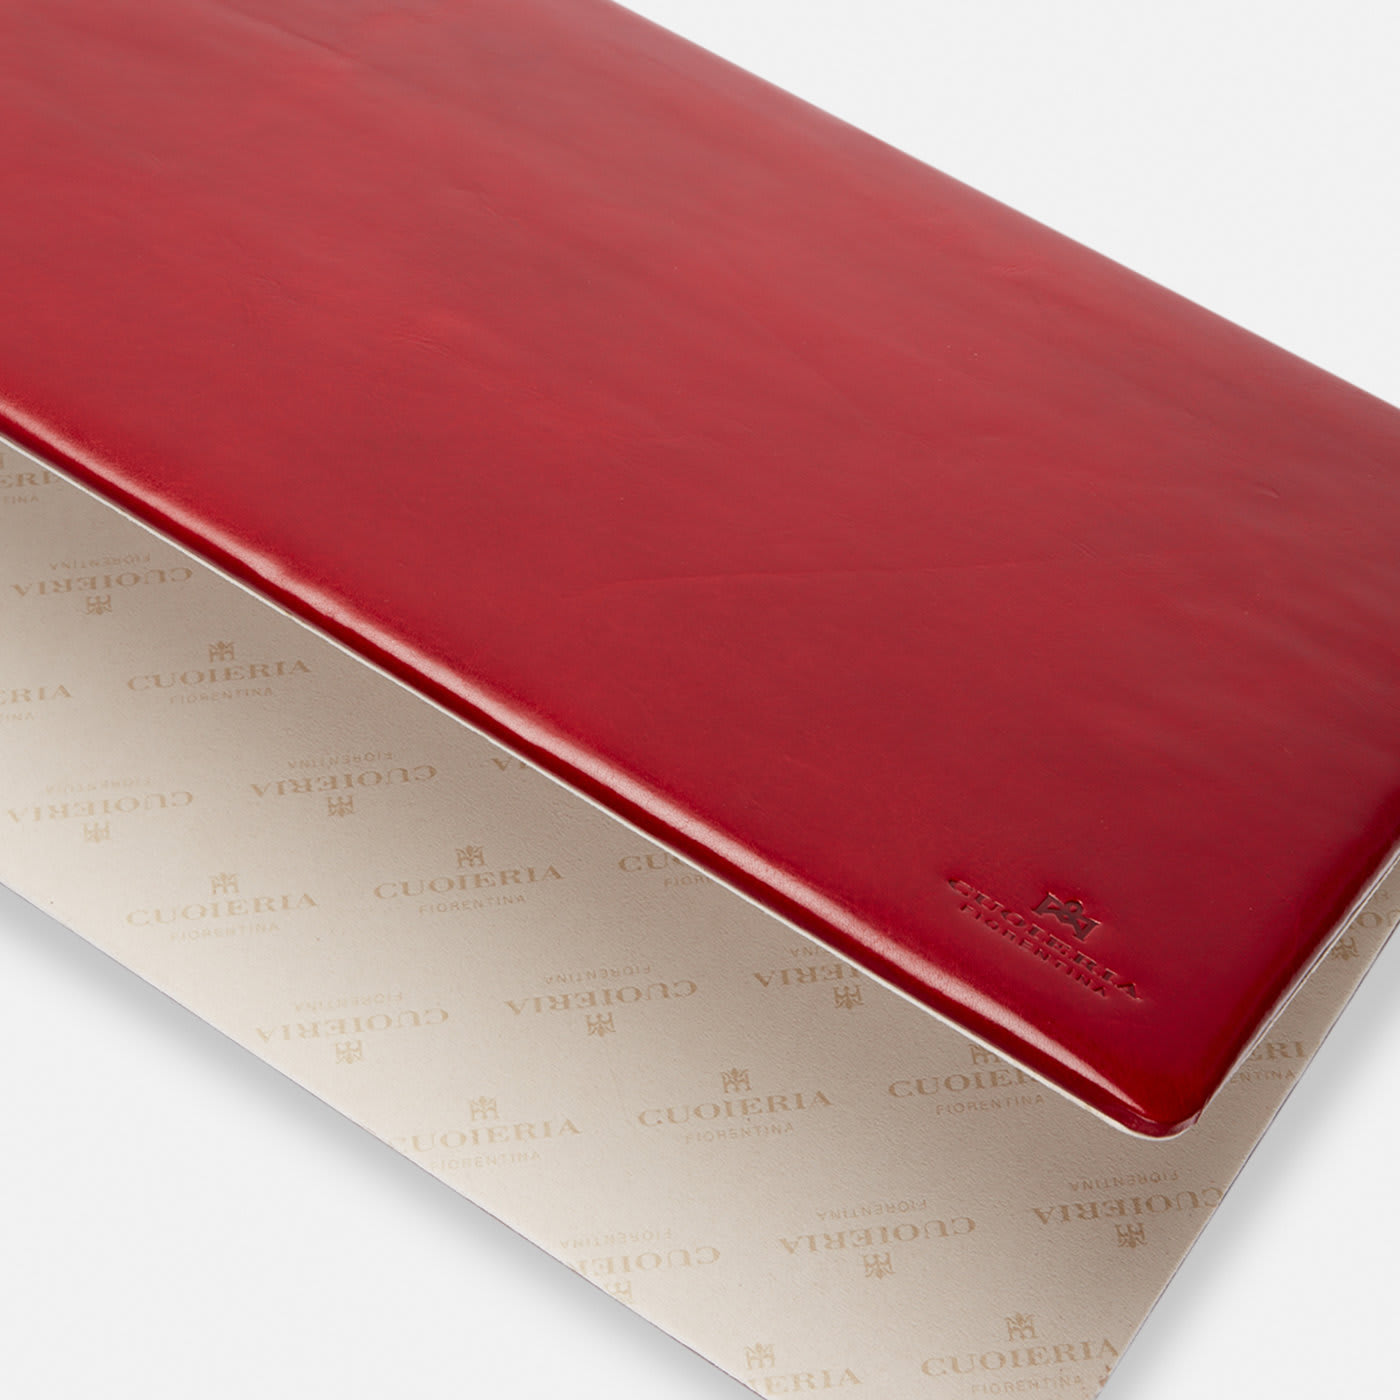 Warm & Color Red Set of Desk Pad, Pen and Letter Holder - Cuoieria Fiorentina